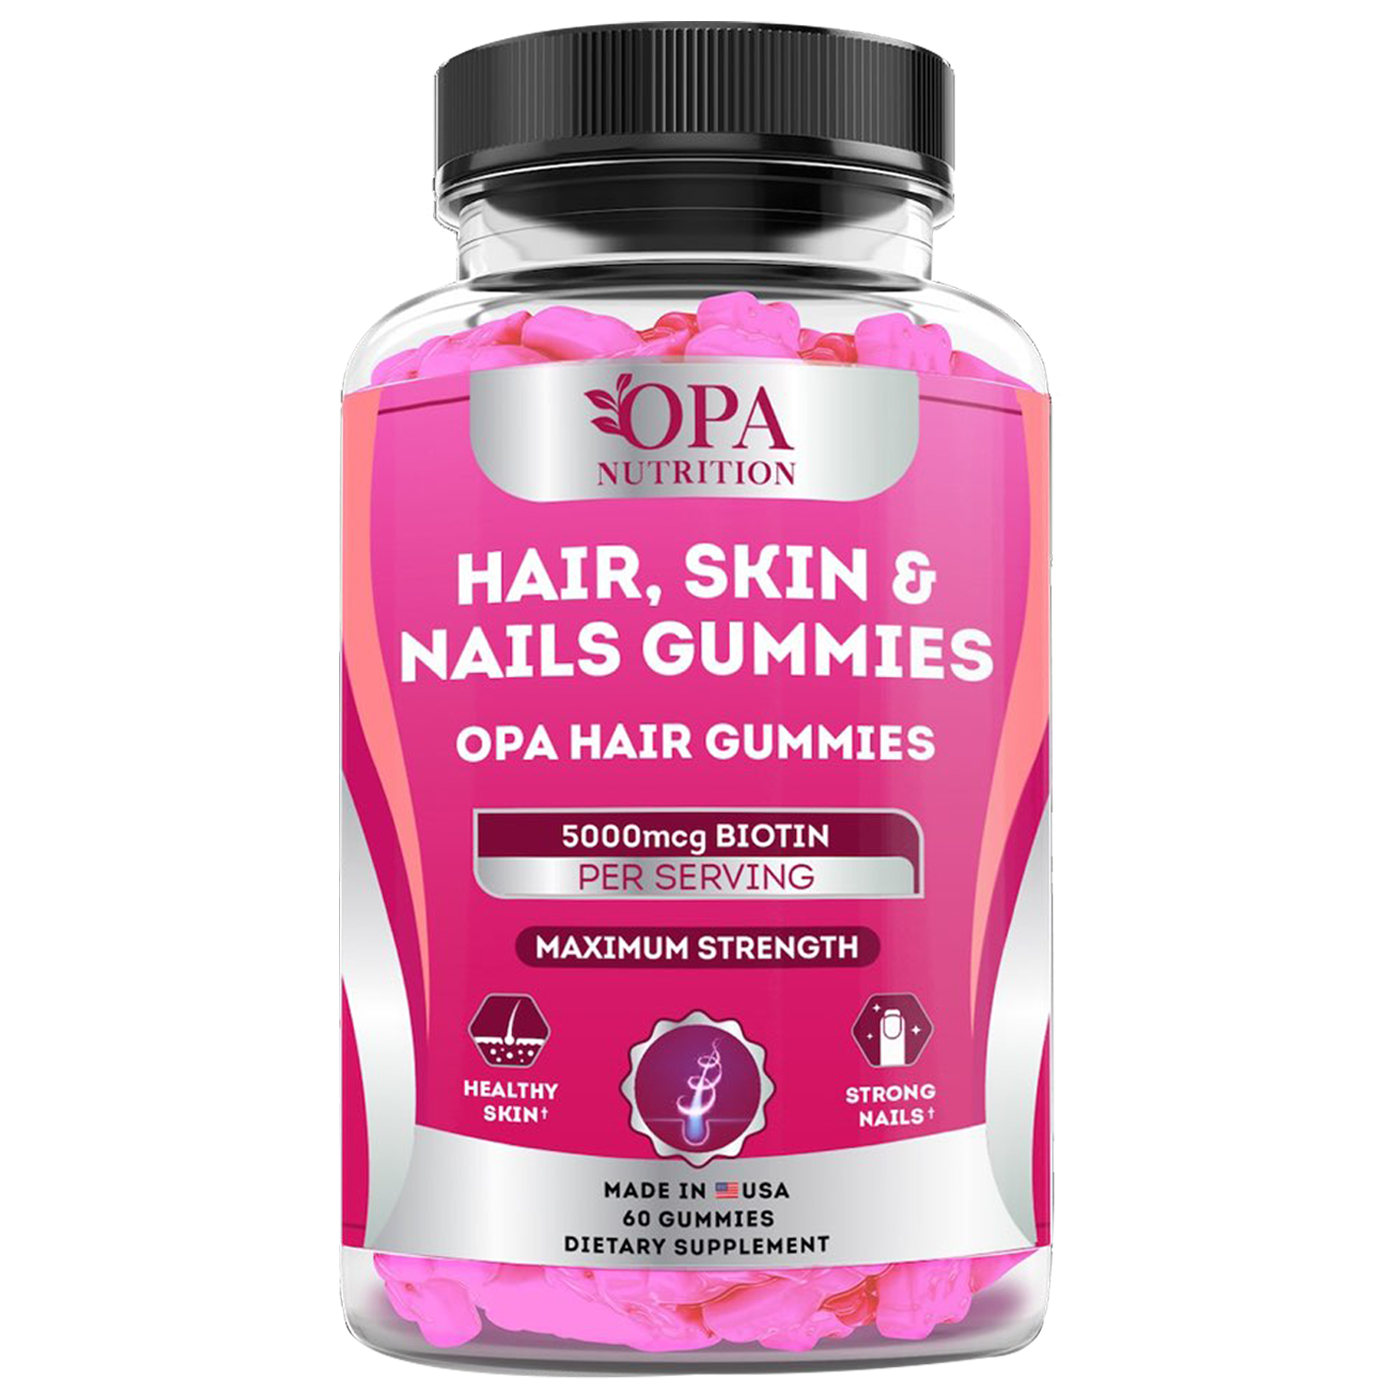 Biotin Gummies for Hair, Skin, and Nails, 5000mcg, Stronger Faster Growth - 60 Ct. Front ingredients